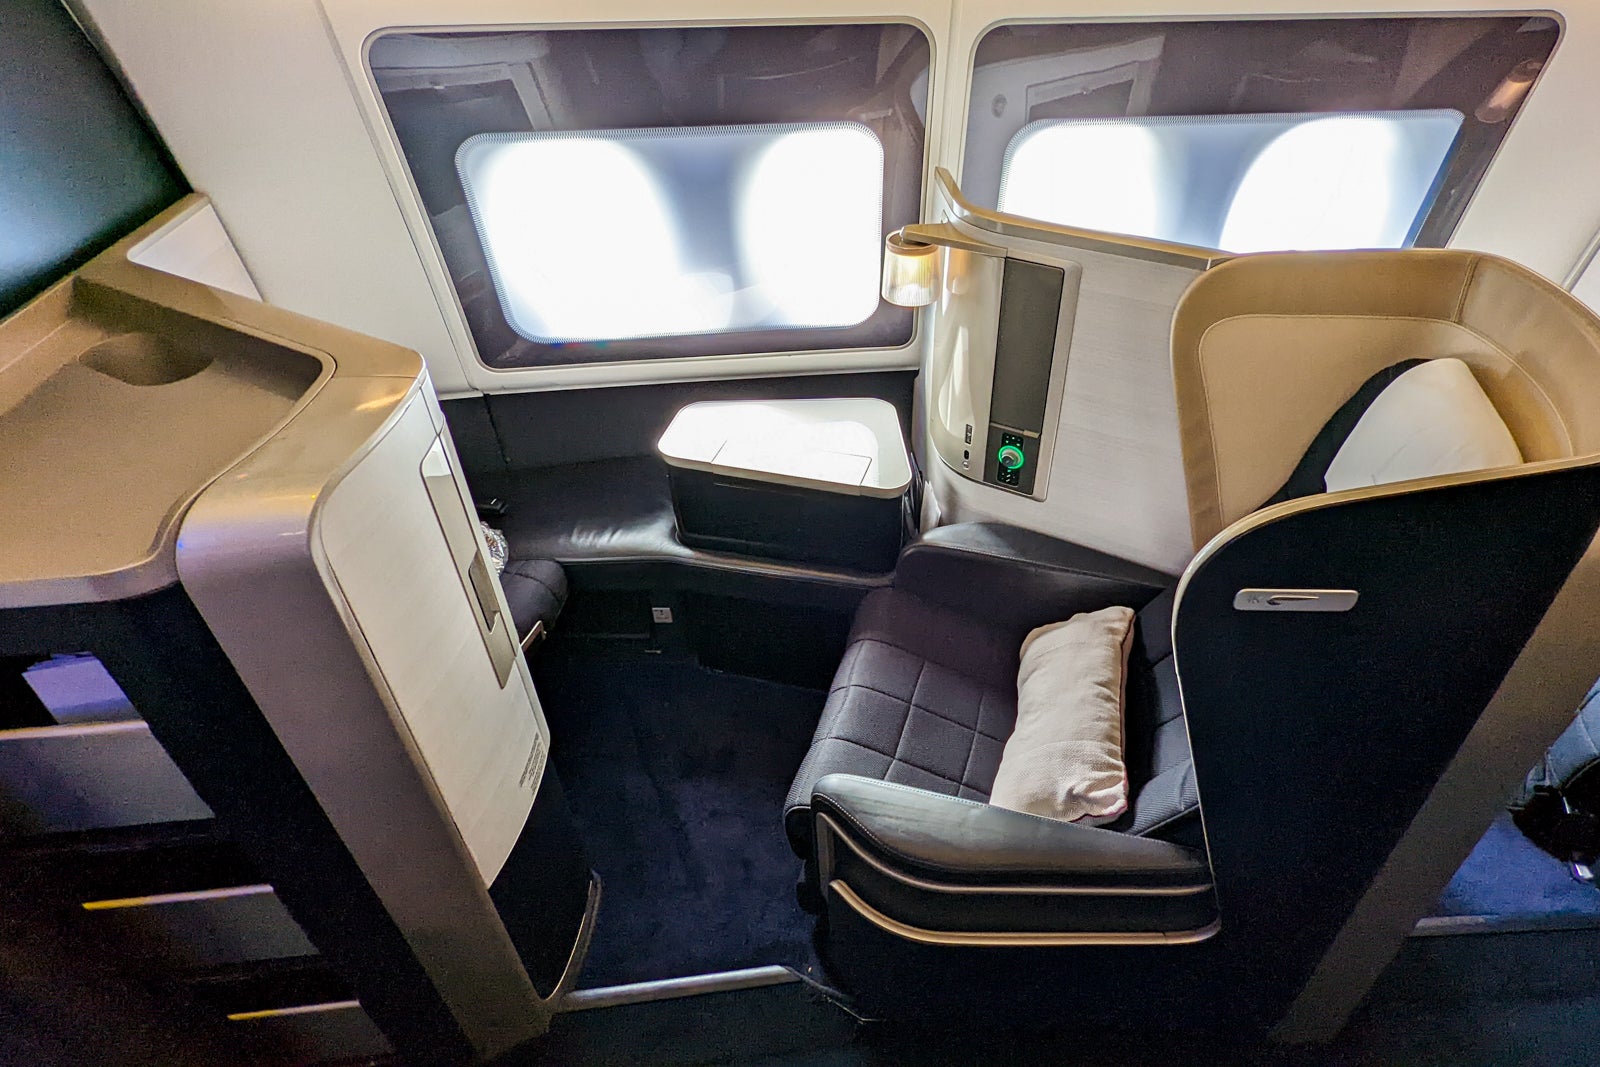 Double Decker Seats - You Are Joking? - Airline Ratings